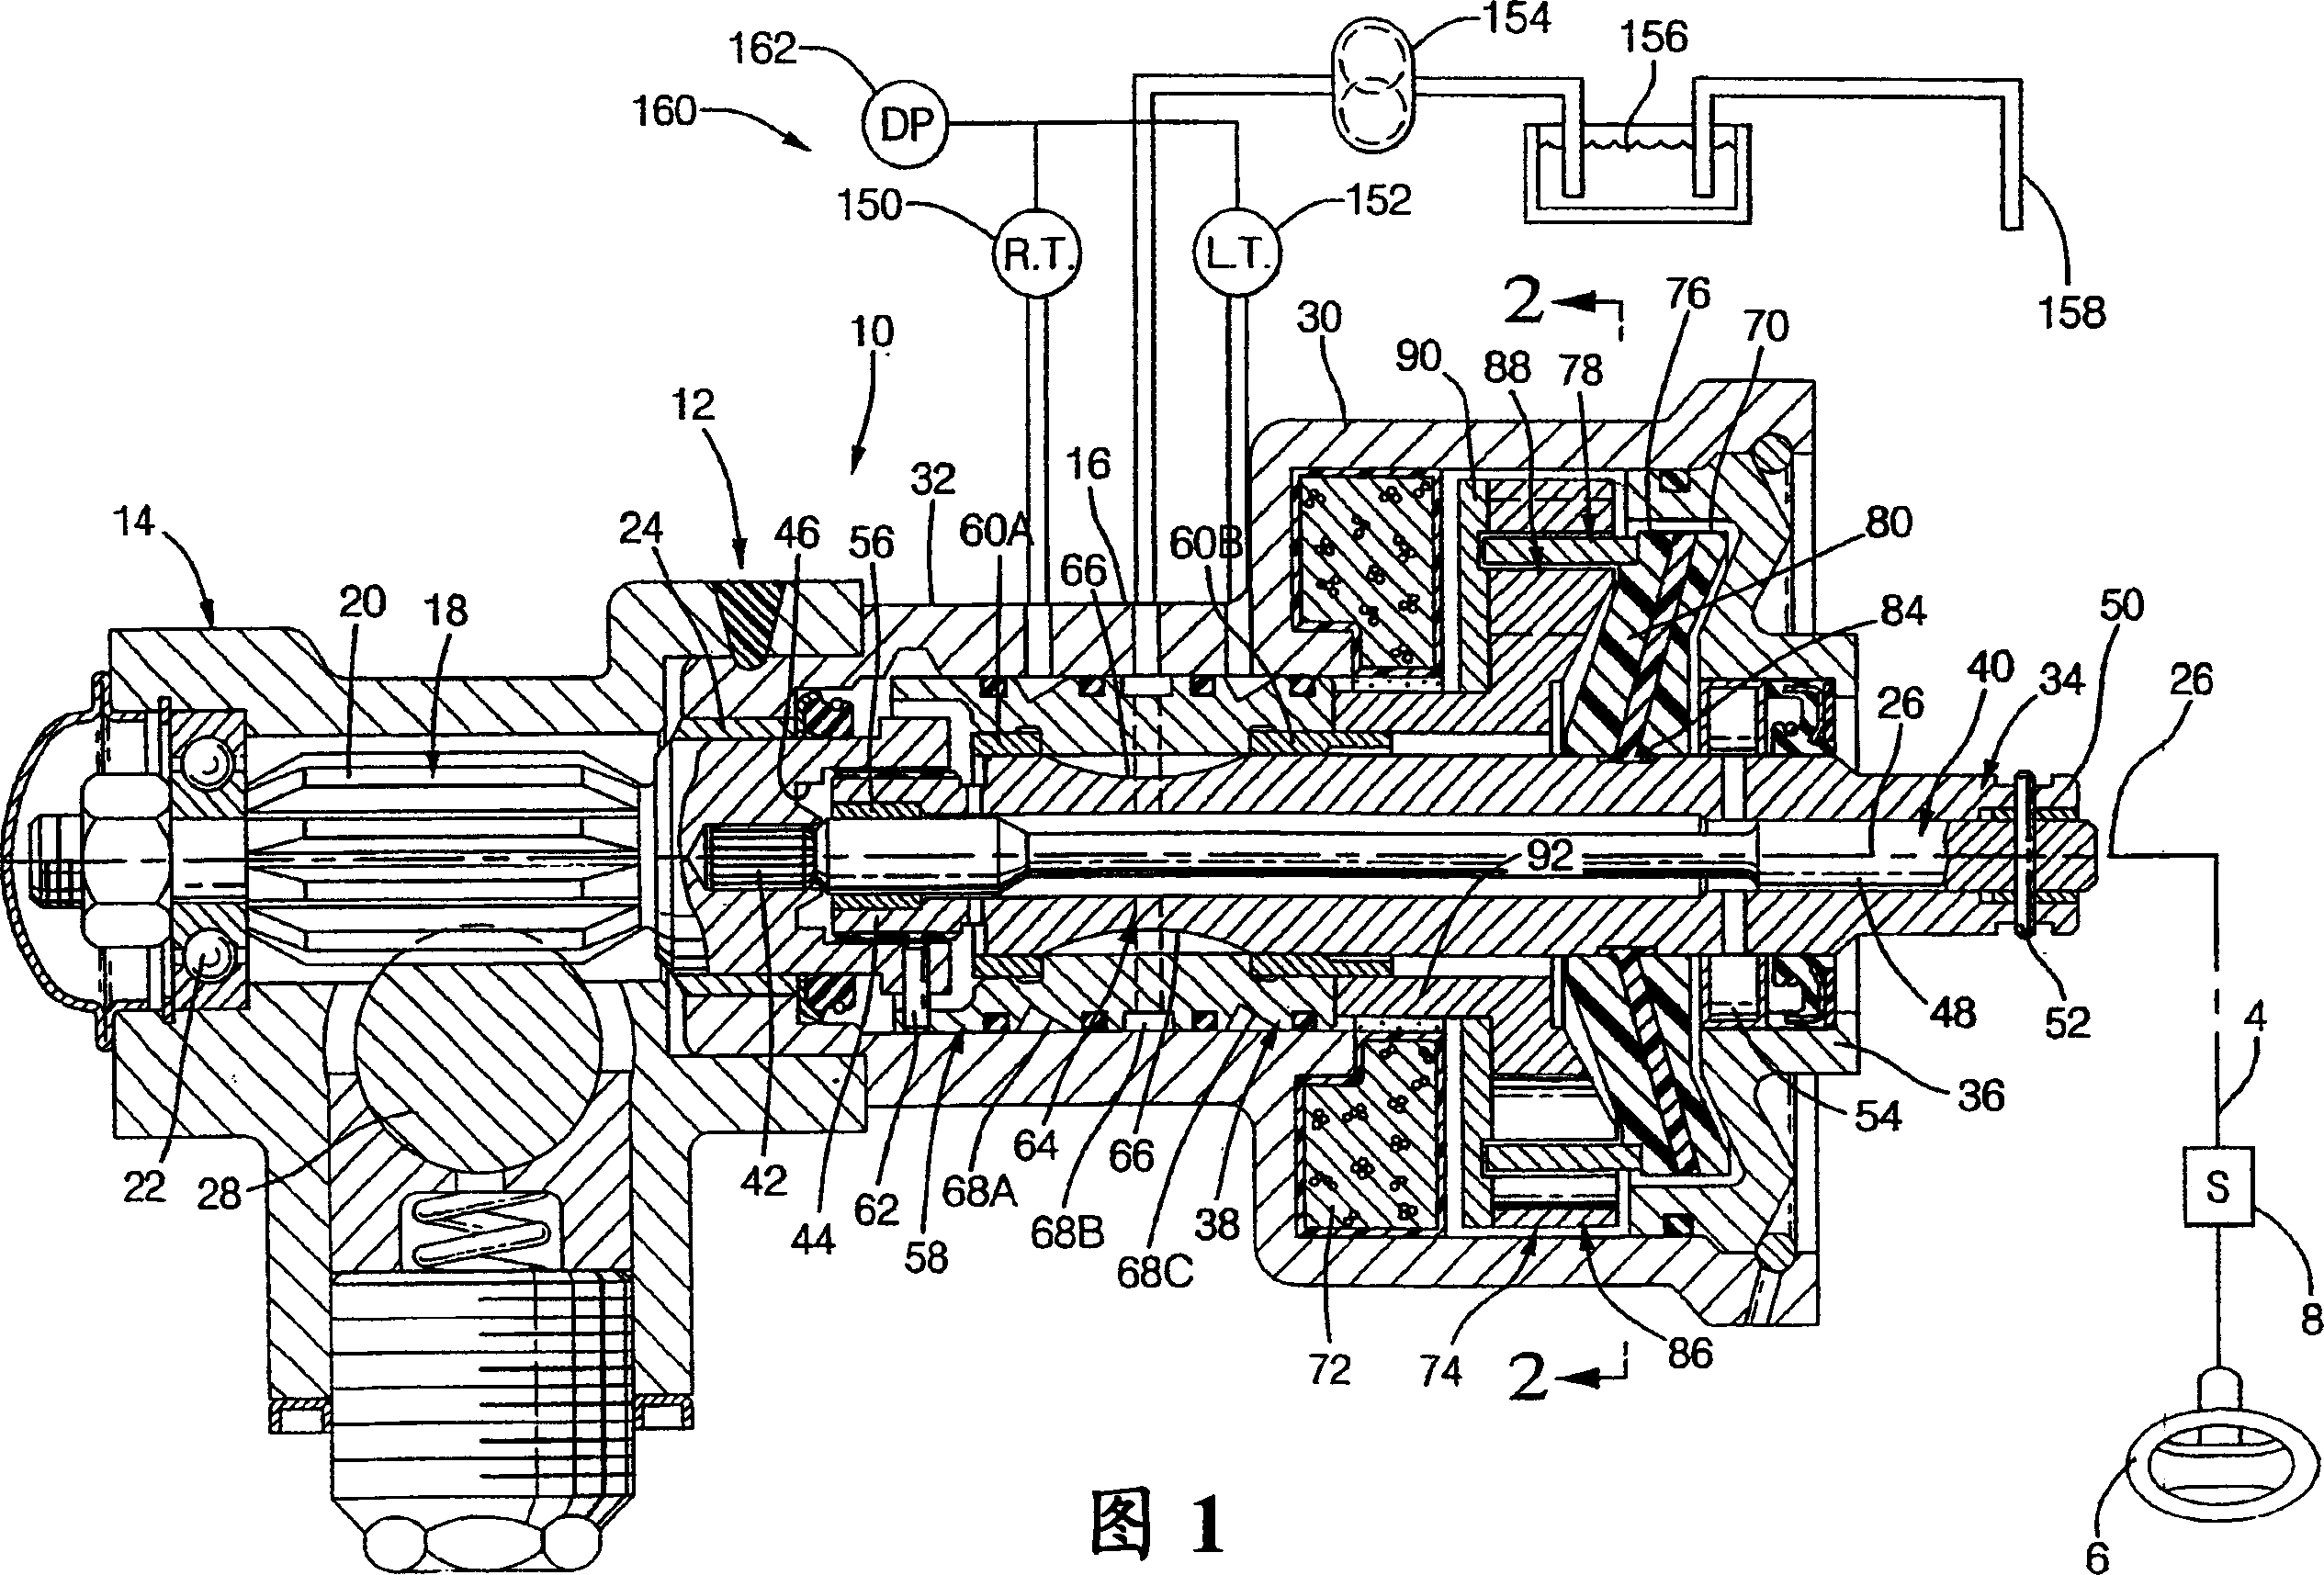 Steering system with leads and pulls compensation